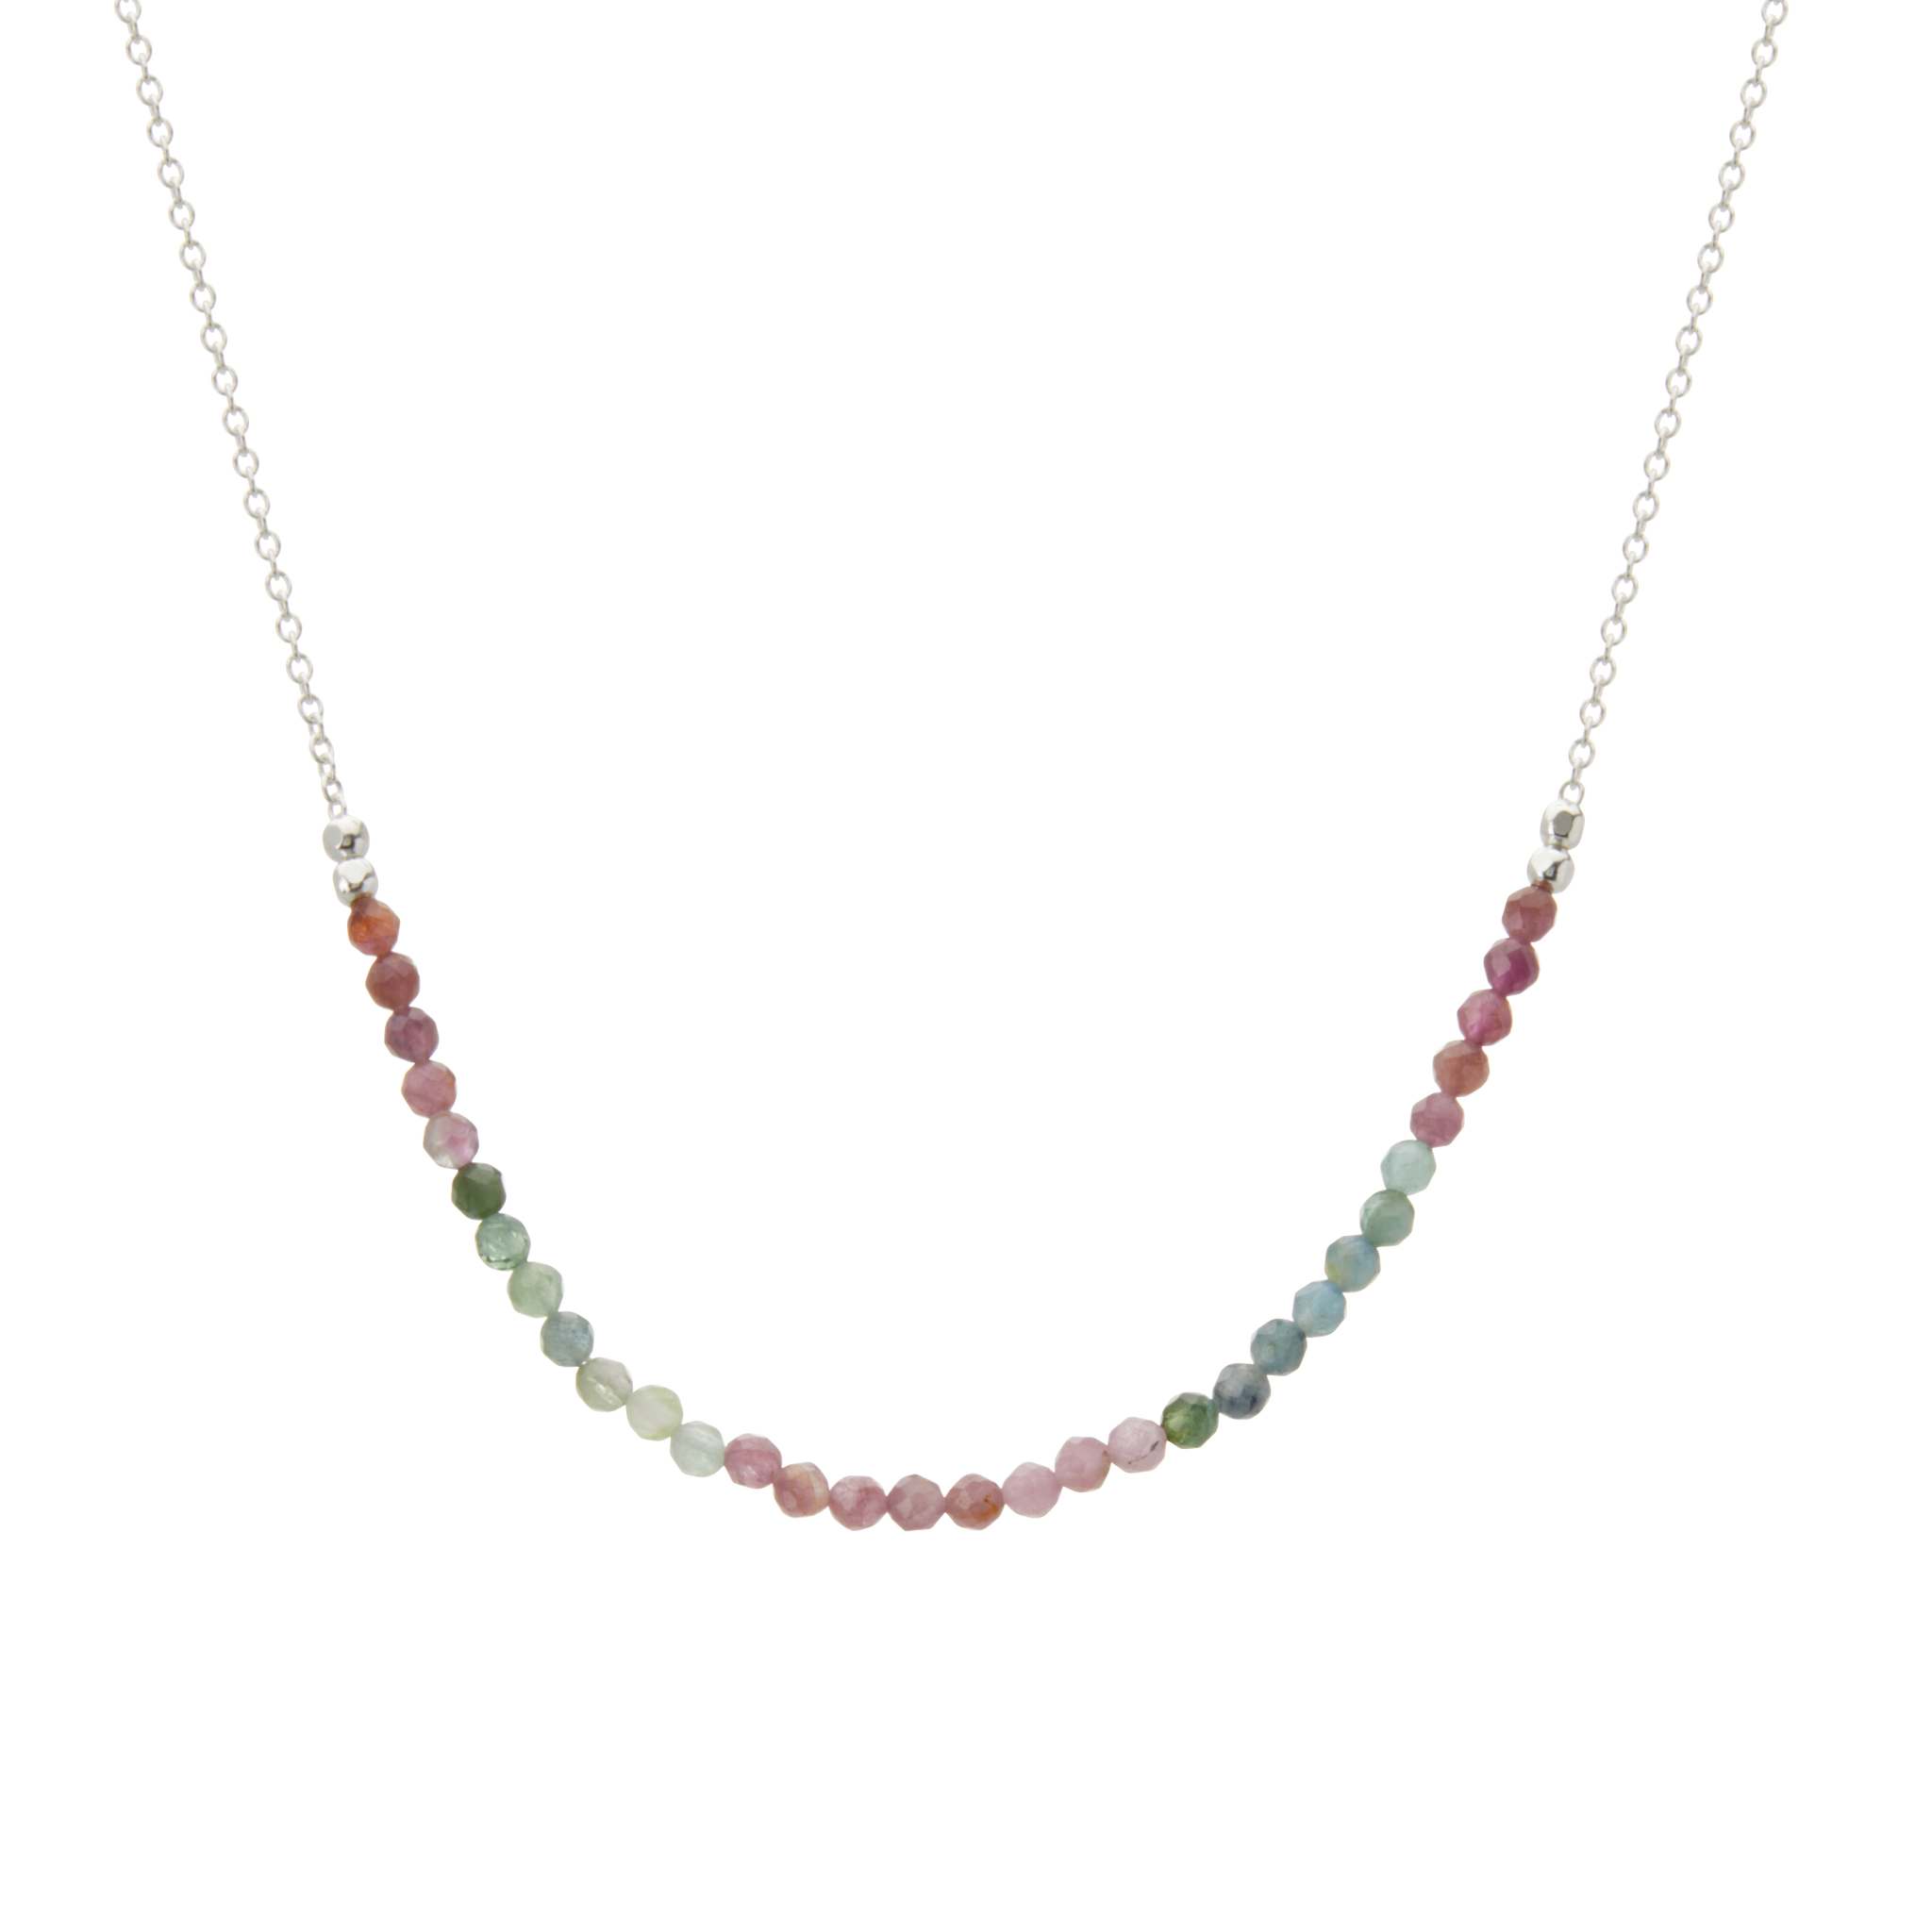 Wandering Soul Tourmaline Necklace in Sterling Silver